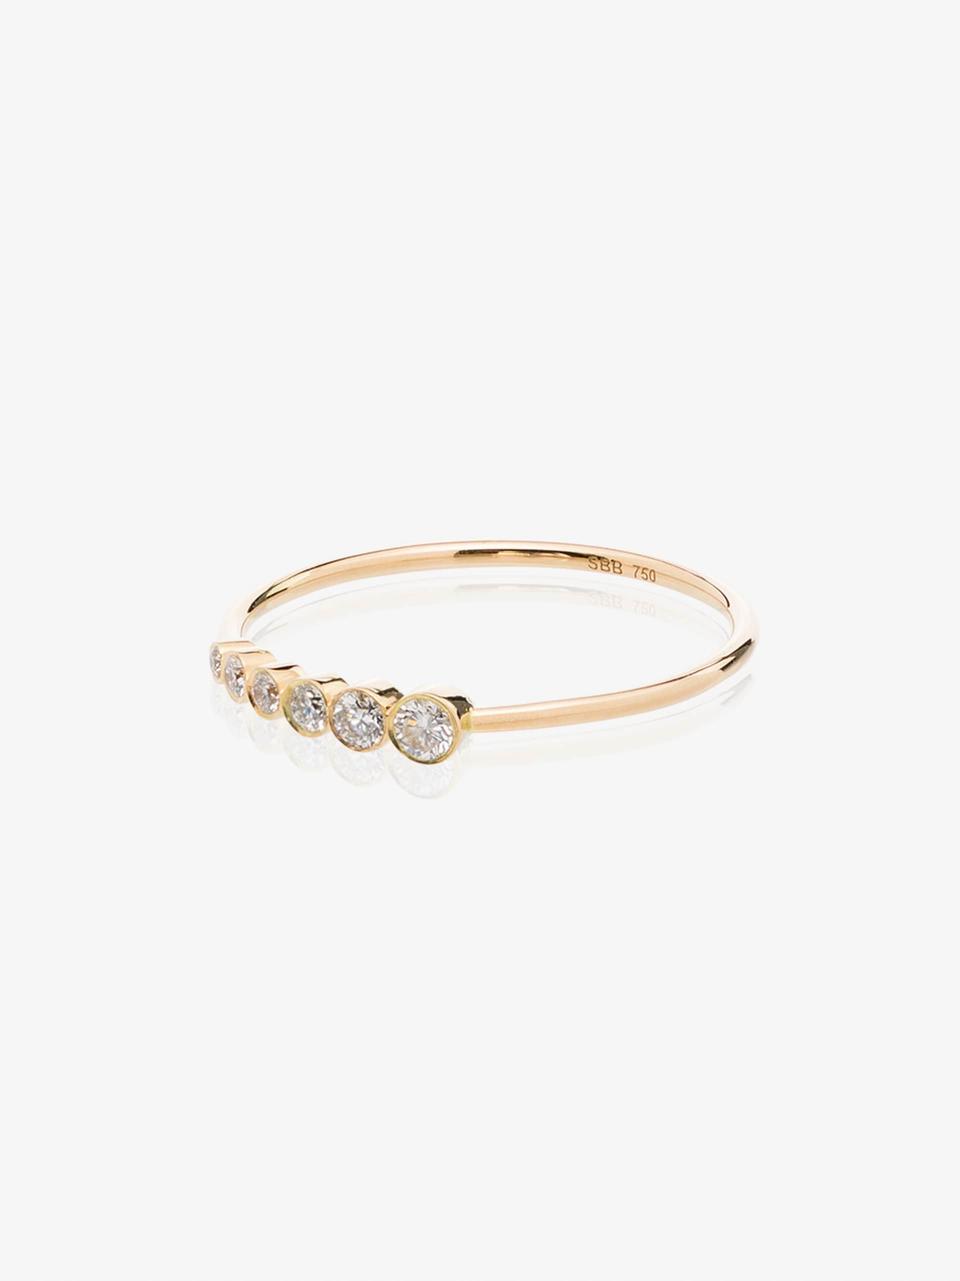 Engagement Ring Trends 2021: The 9 Most Covetable Styles to Have On ...